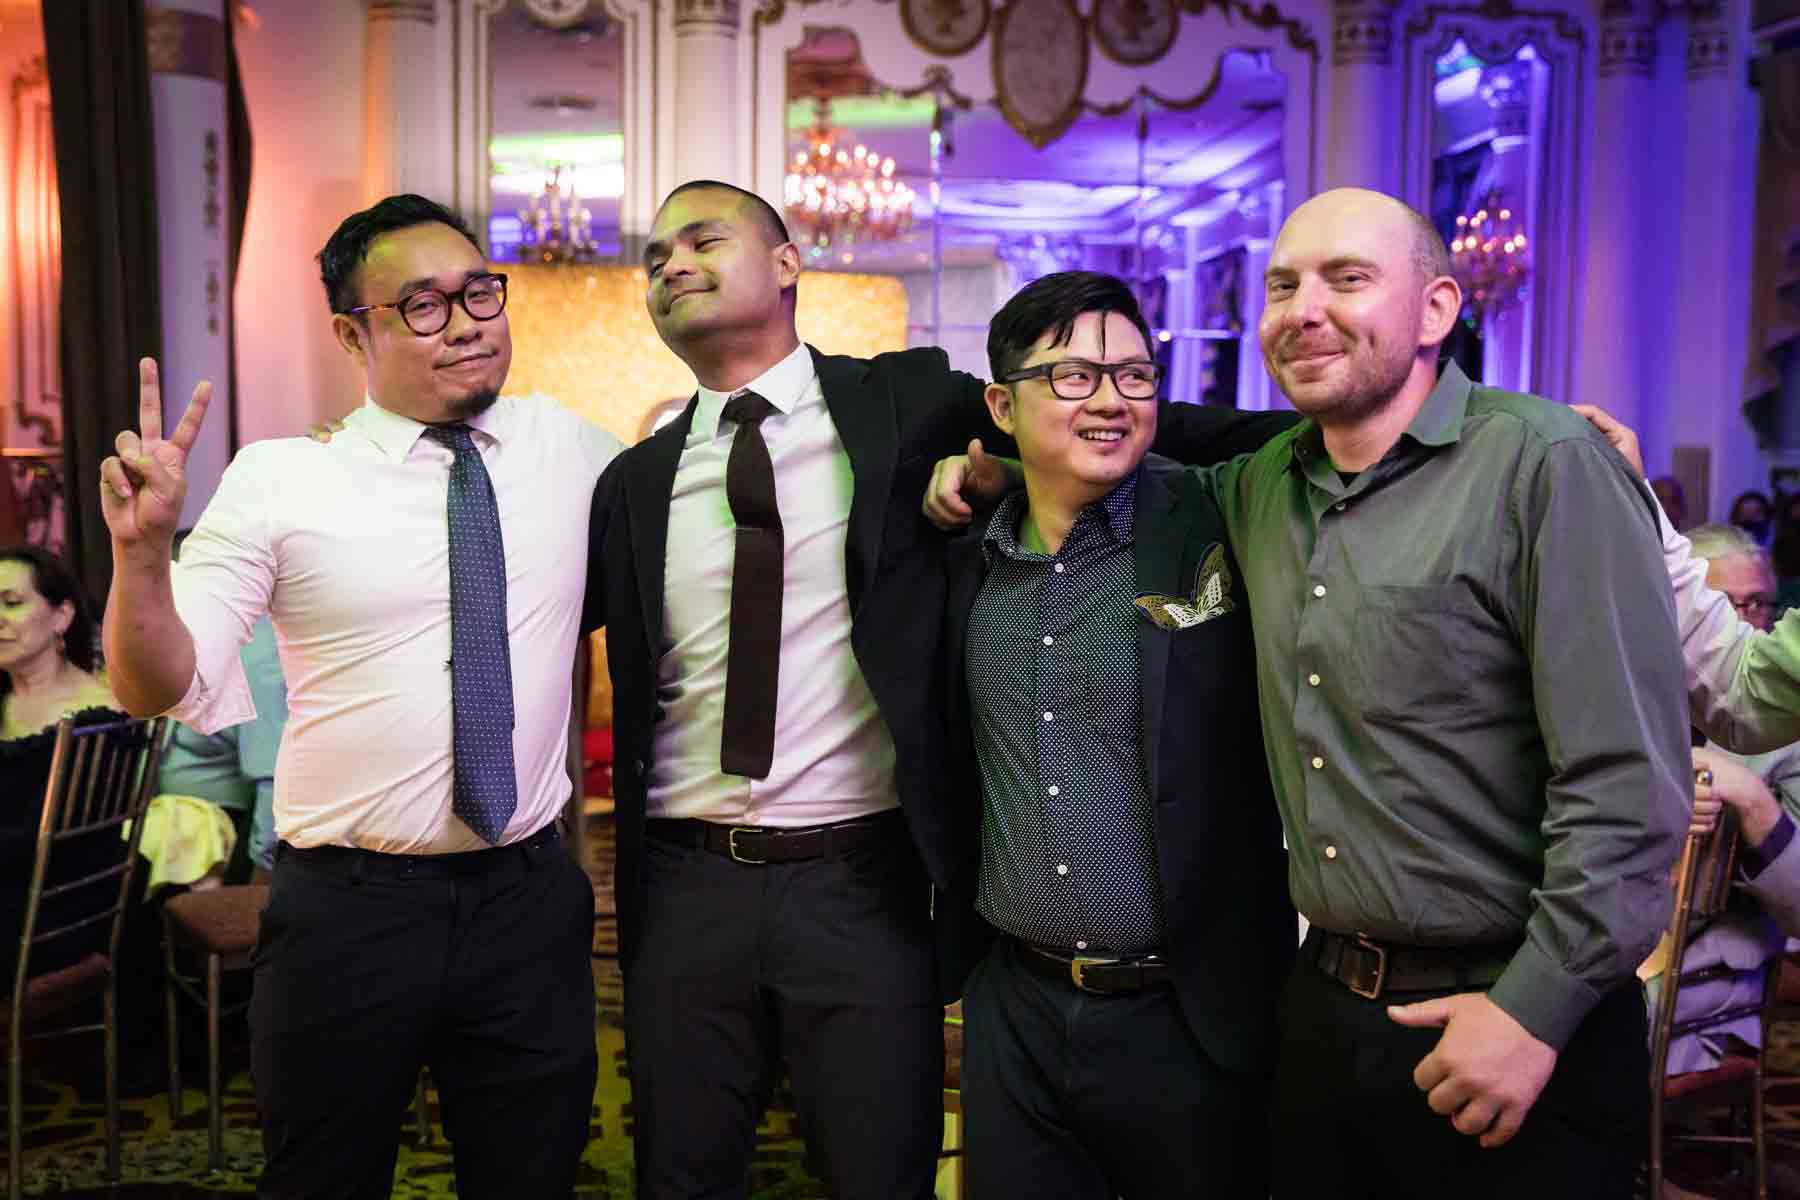 Four men embracing on the dance floor at a Terrace on the Park wedding